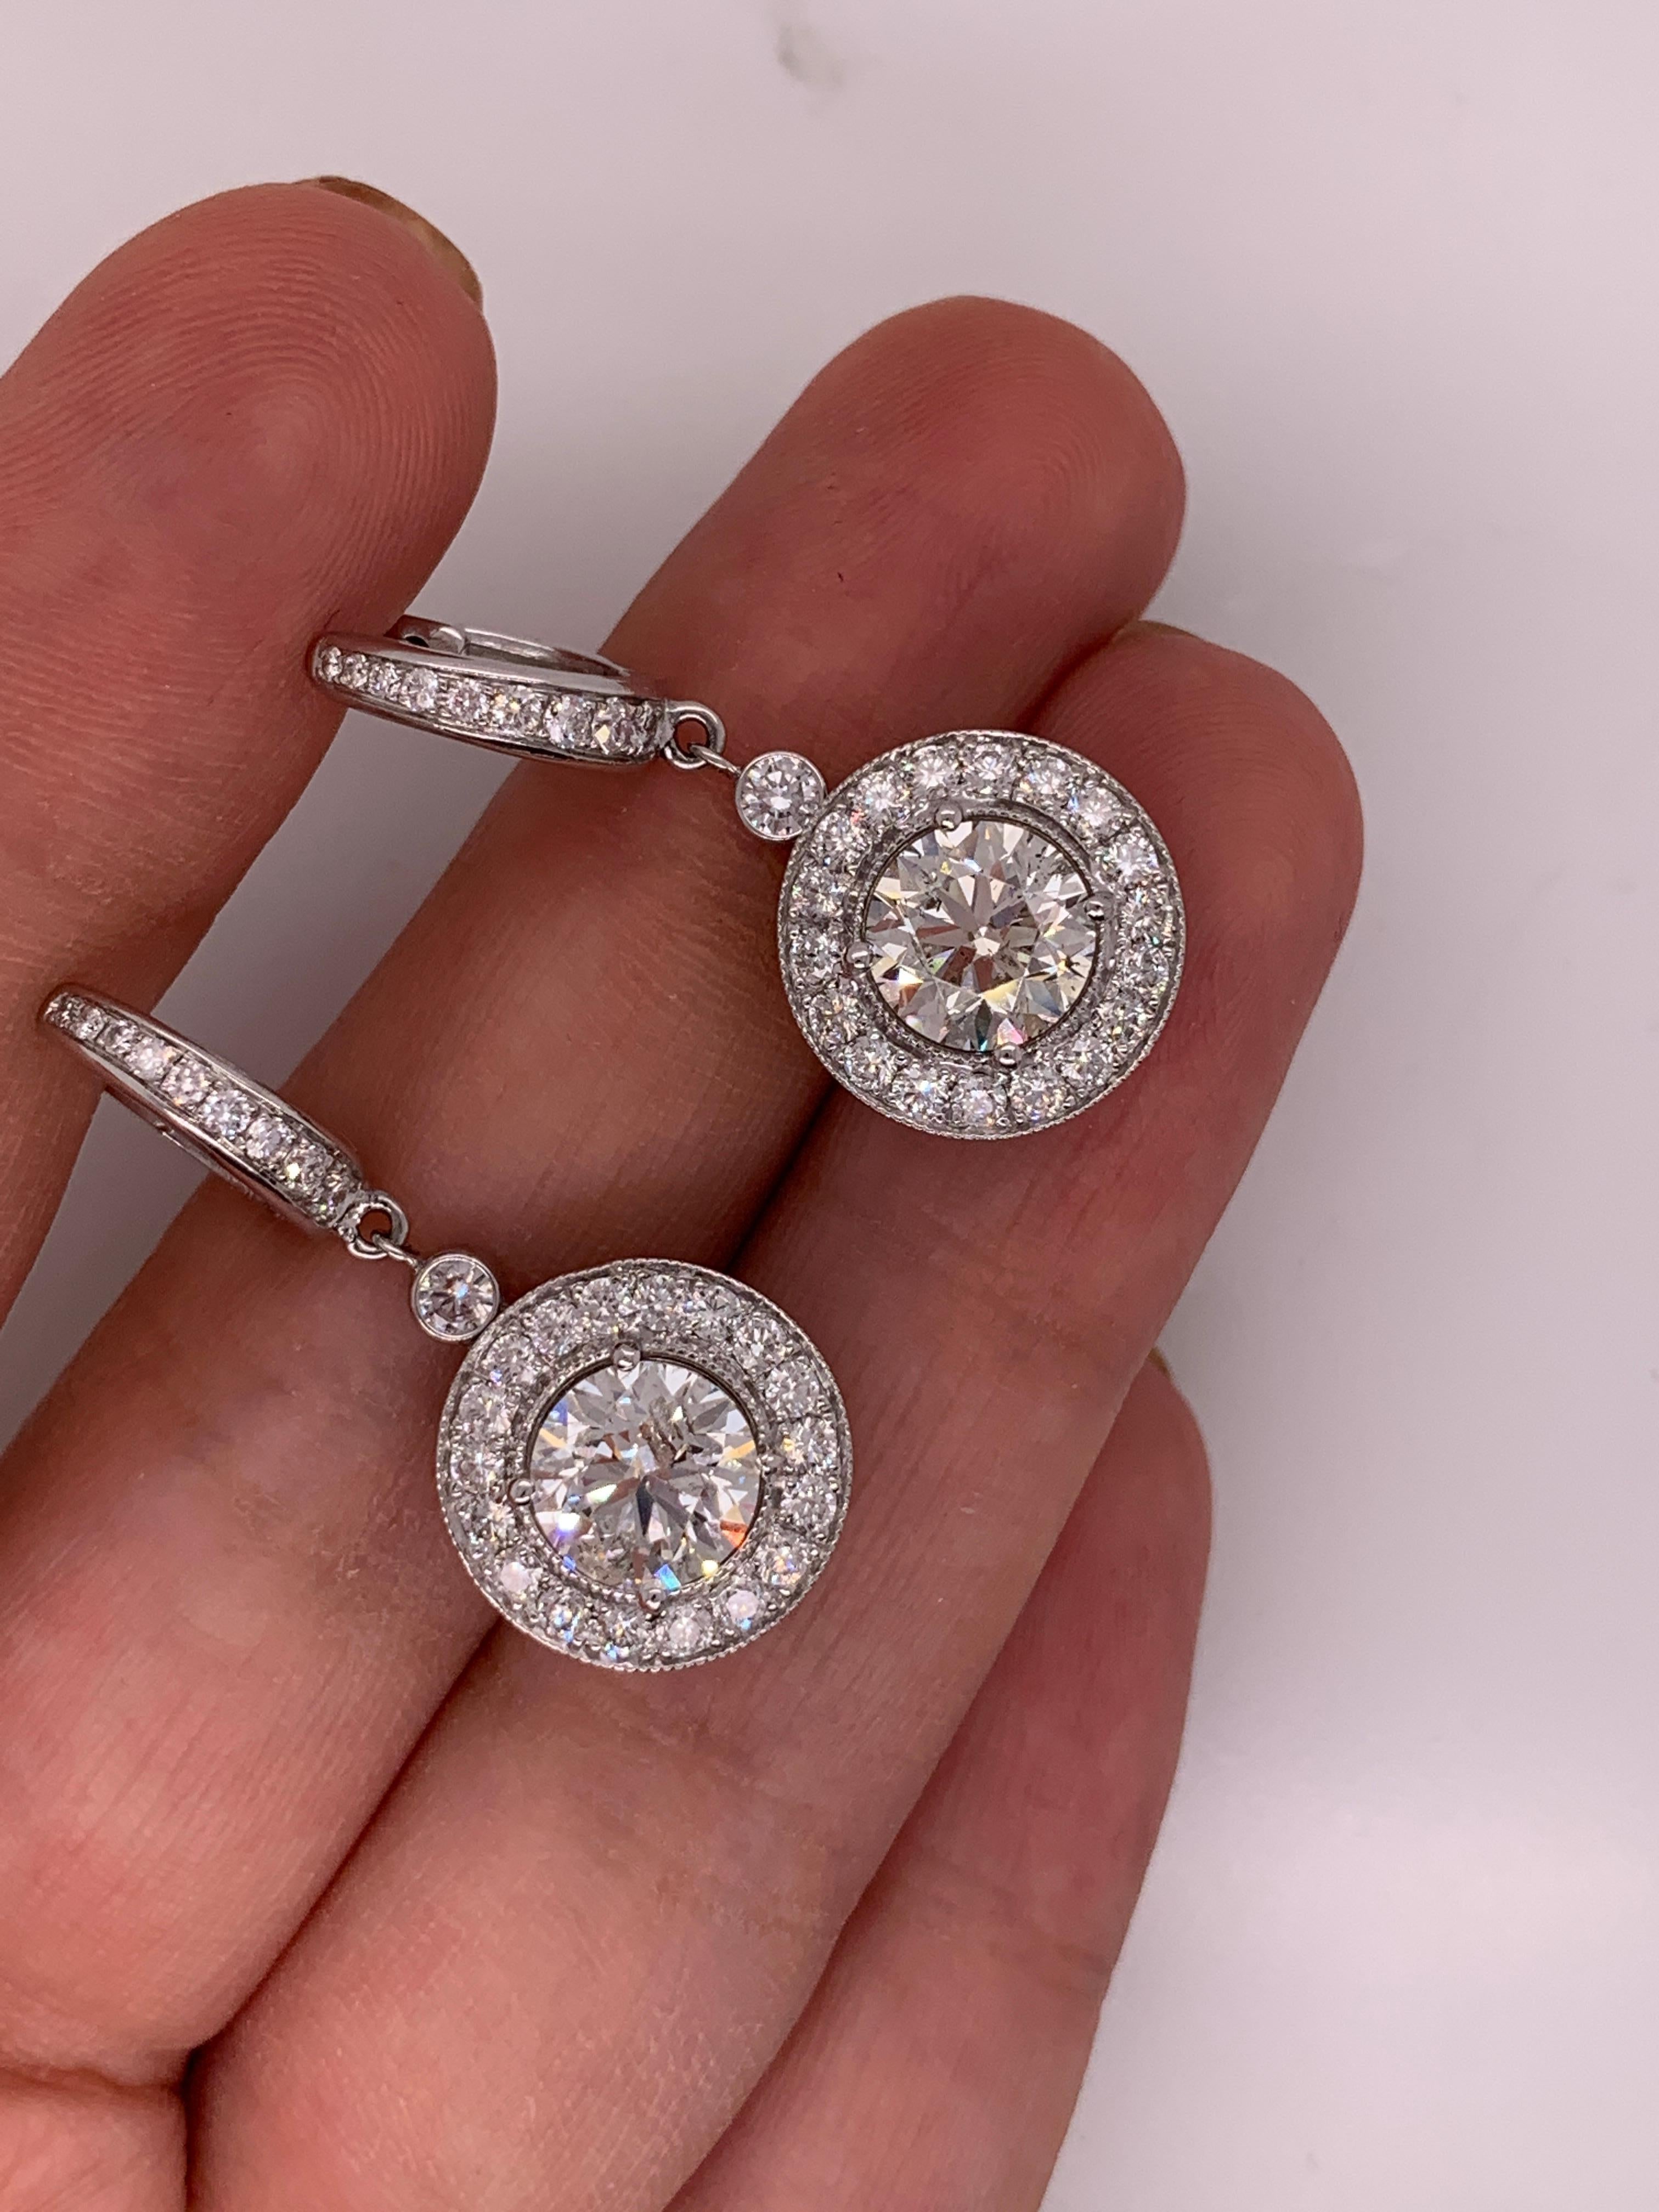 18k white gold features round cut diamond surrounded by round brilliant cut diamonds set in a bezel. 

Two center diamonds are 4.75 Carats, surrounded by 1.90 carats of diamonds. 

Diamond encrusted post

Lever back closure

Length of drop: 1